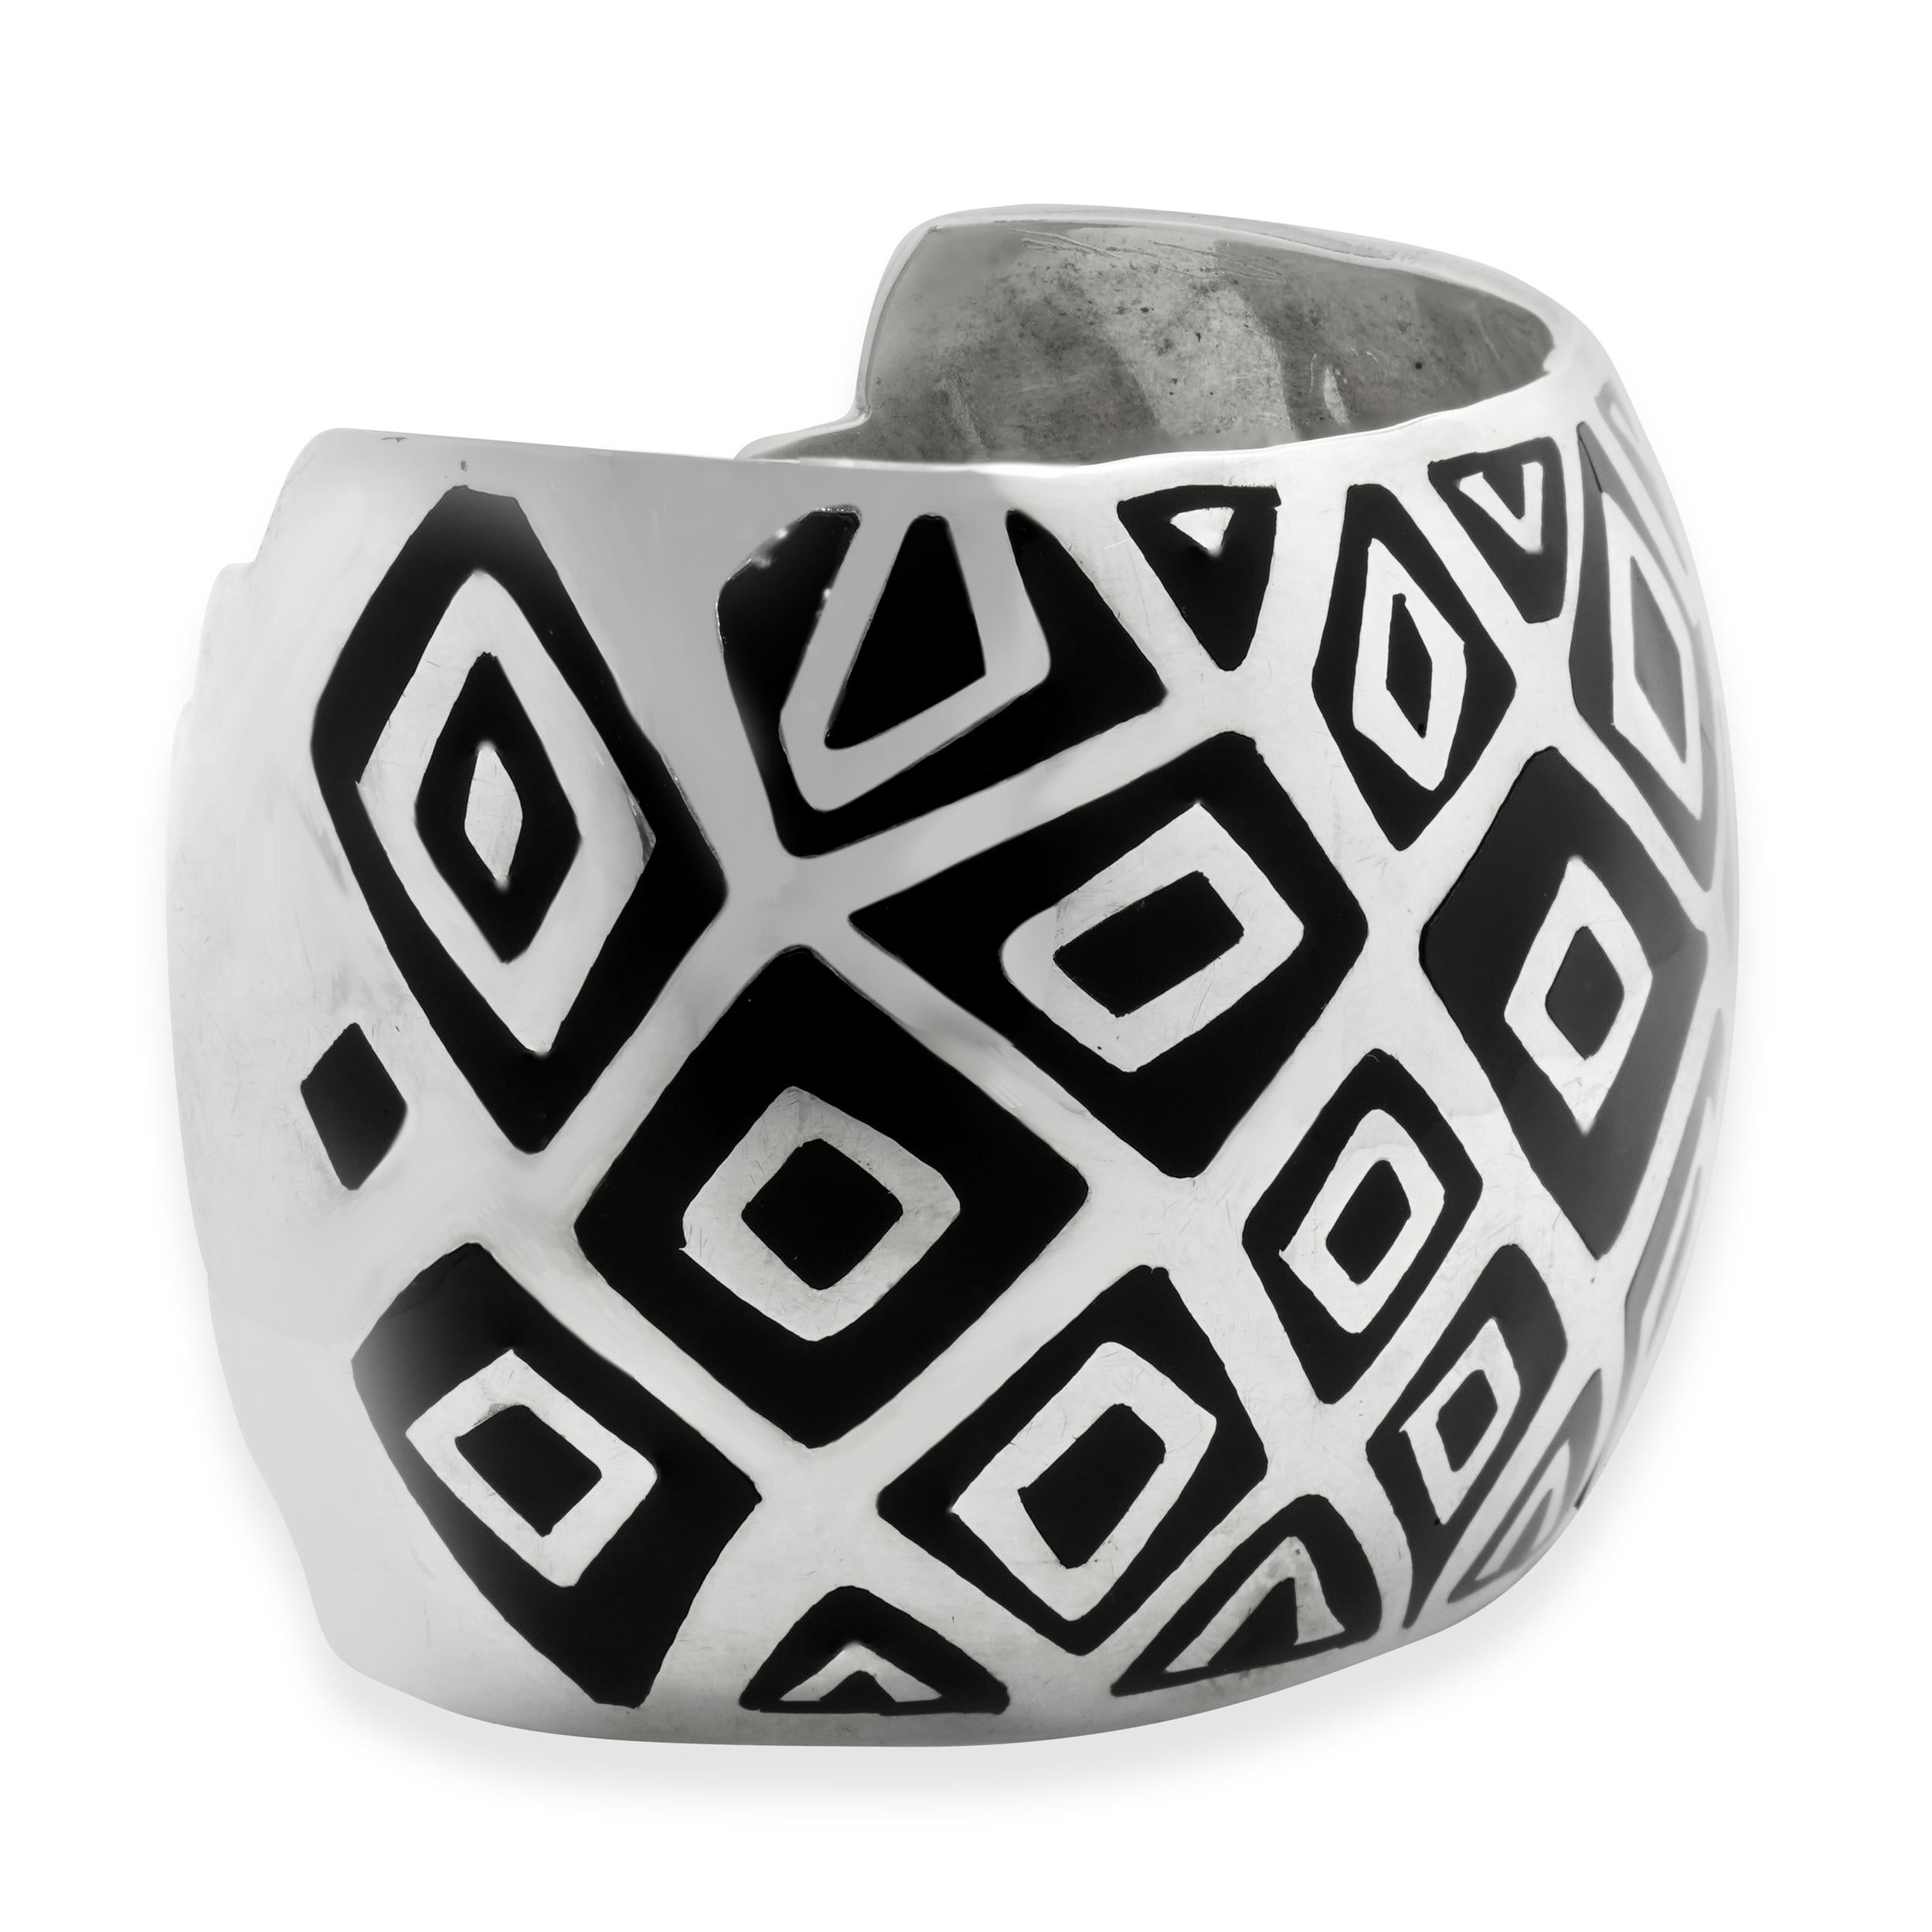 Designer: custom
Material: sterling silver
Dimensions: bracelet will fit up to a 6.5-inch wrist
Weight: 93.00 grams
